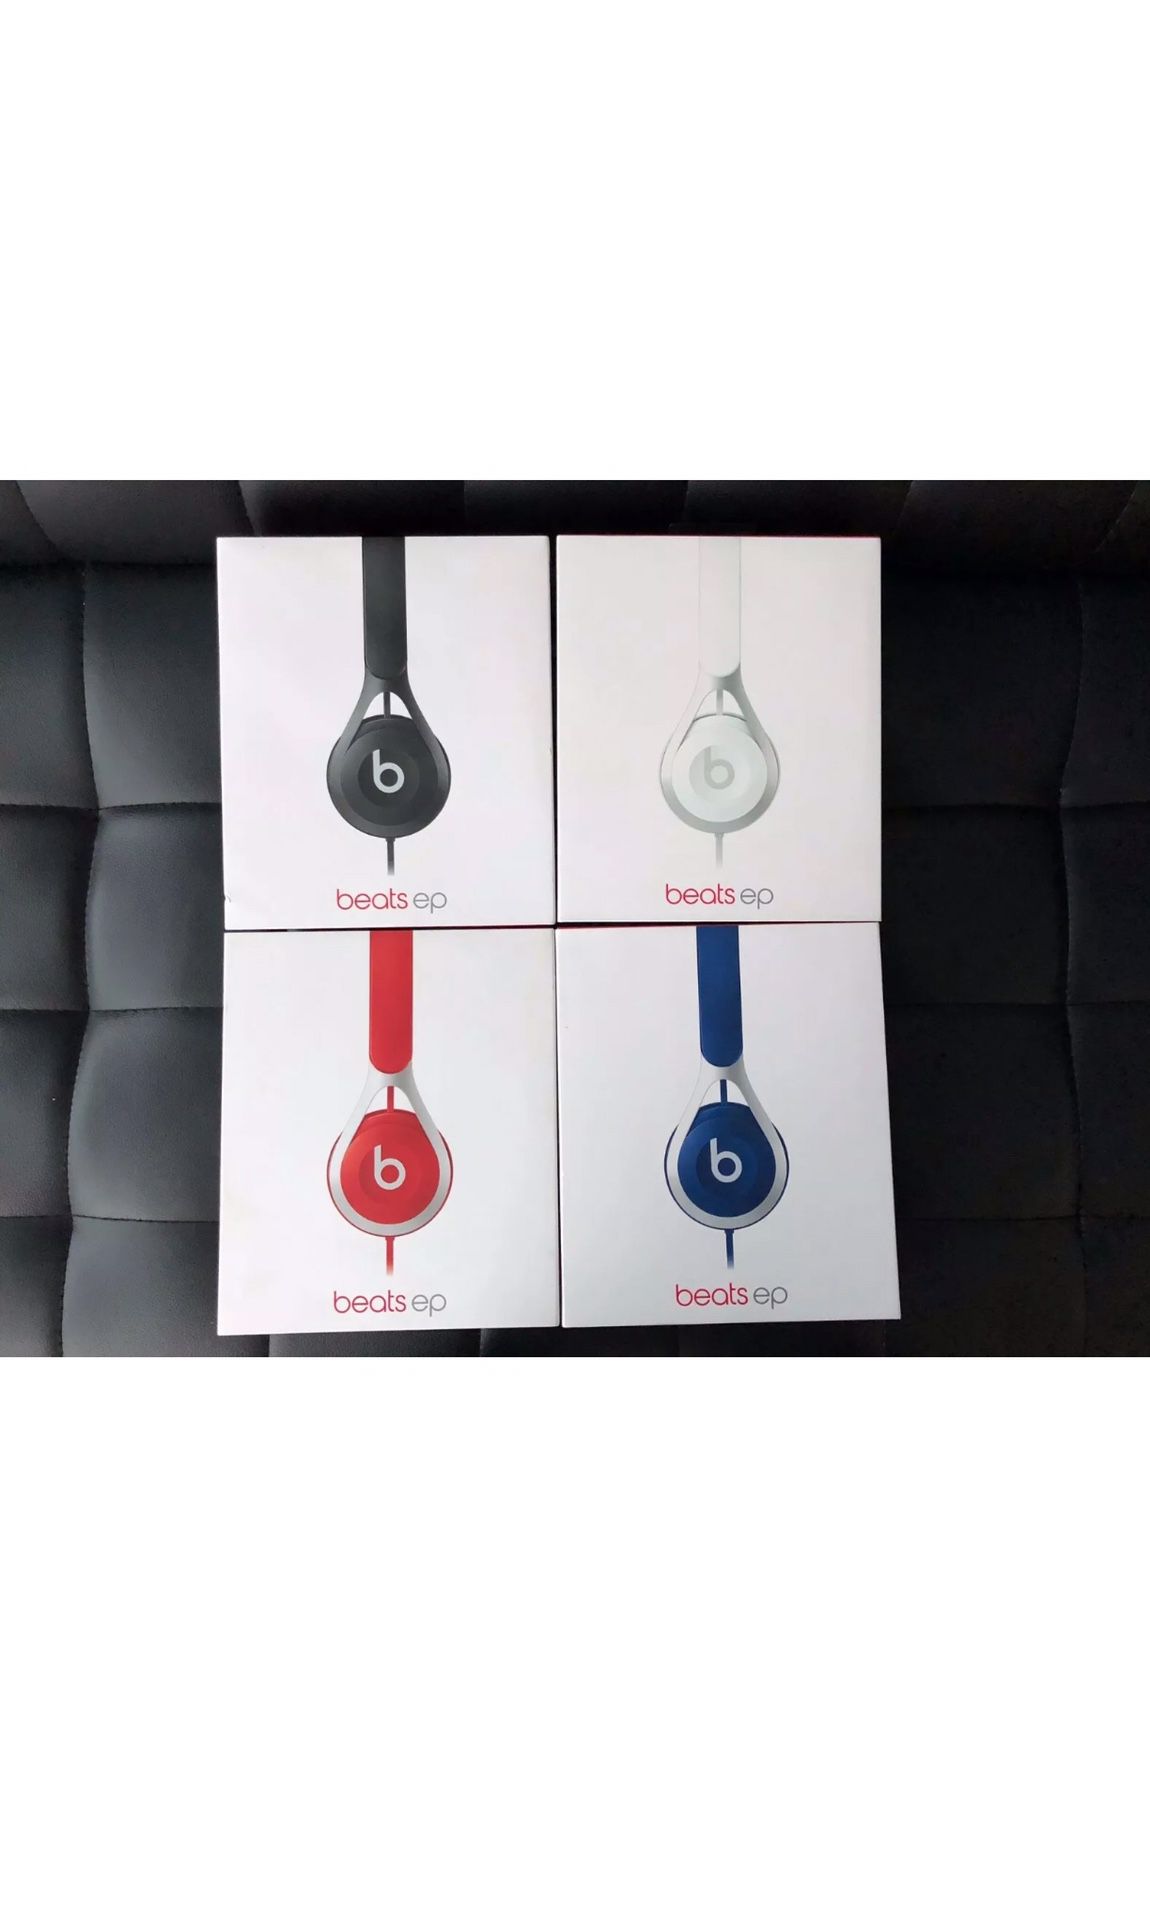 1 open box Powerbeats up for sale.